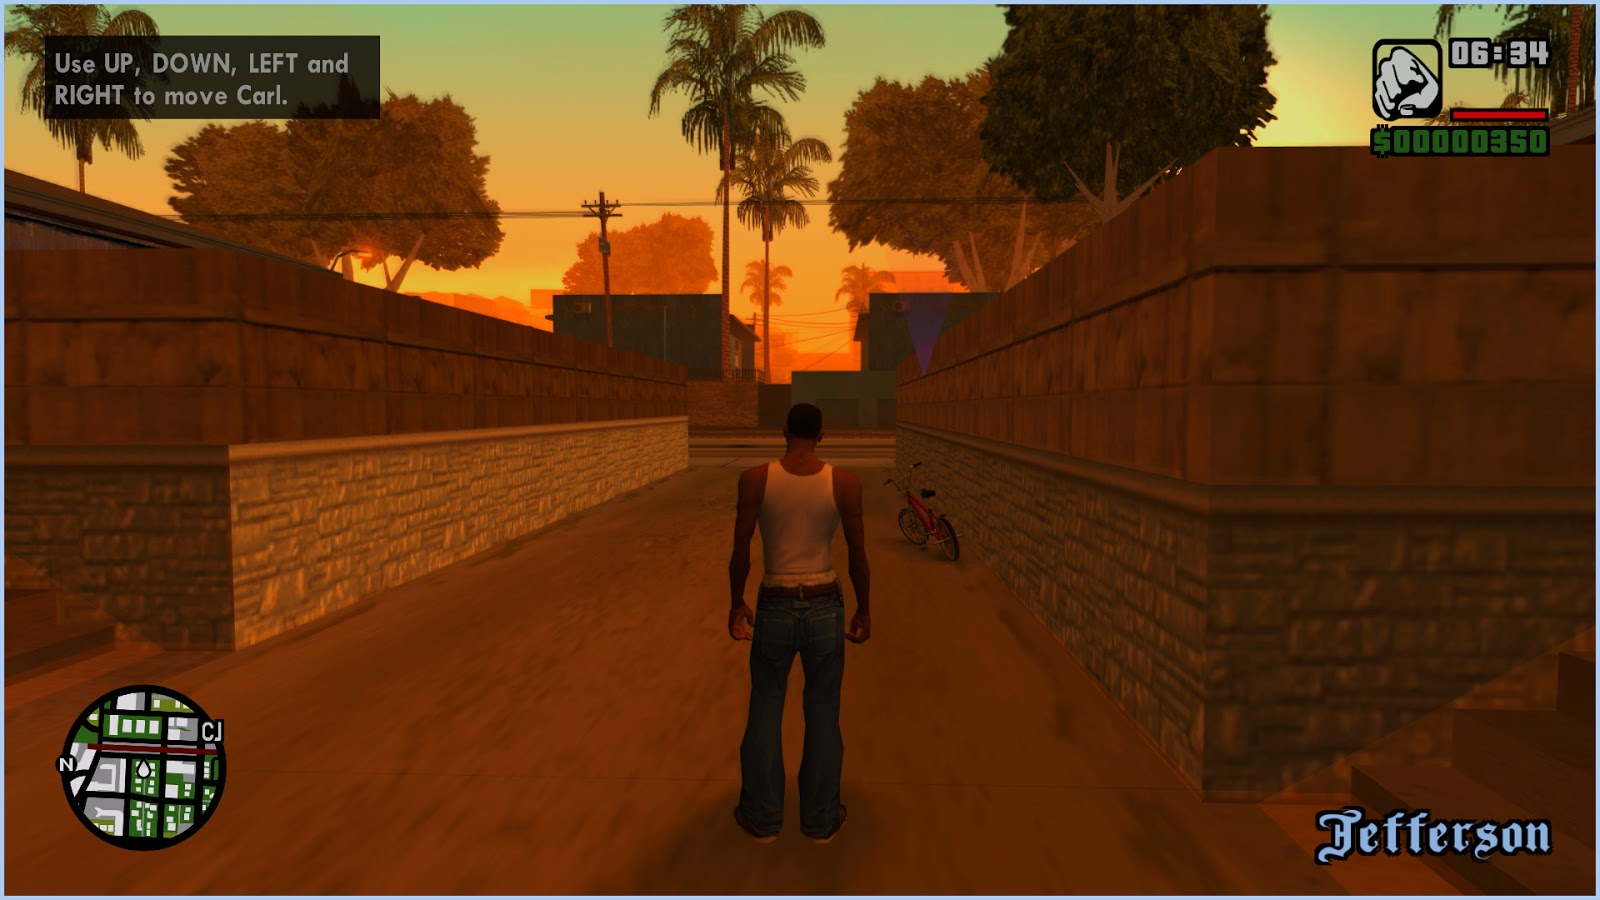 gta san andreas game free download for pc windows 10